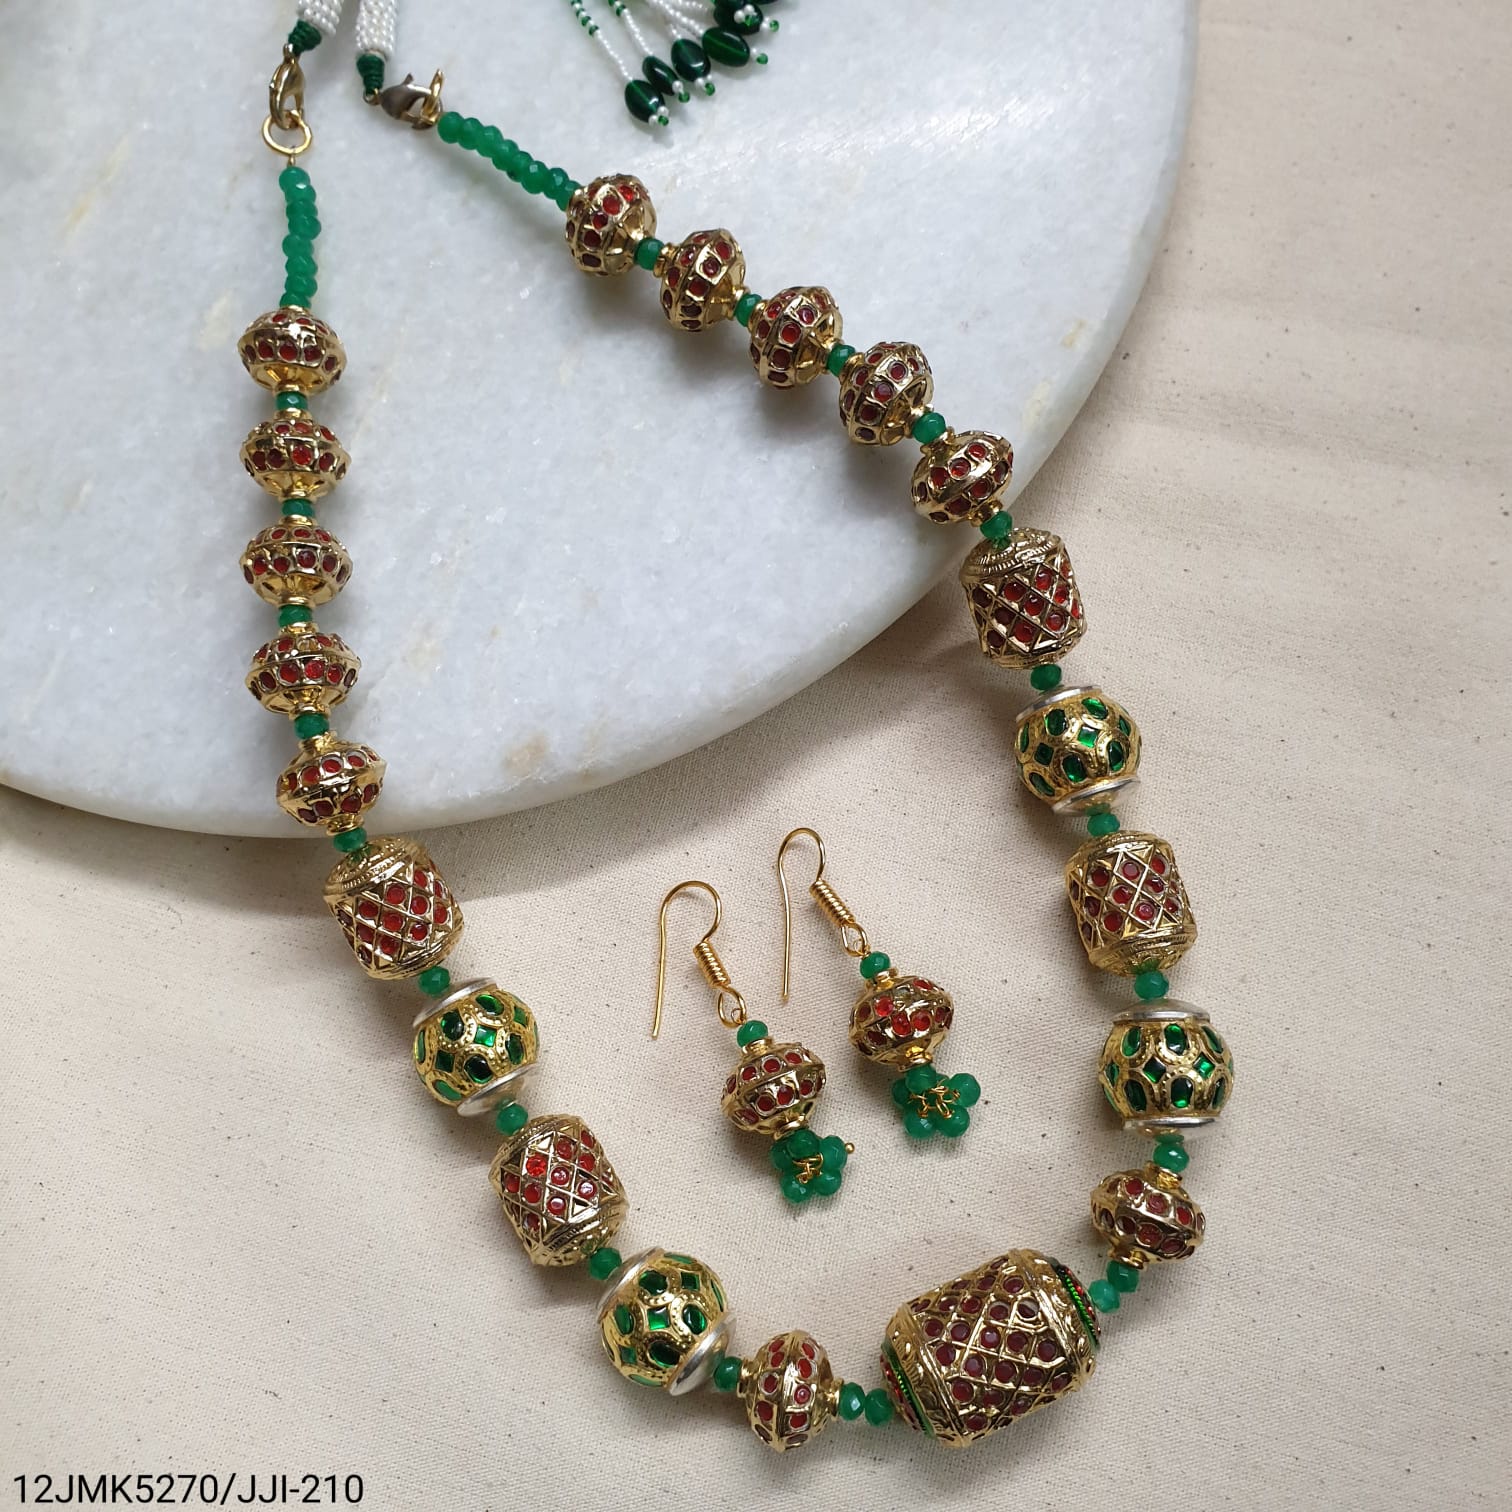 Red Green Jadau Bead Necklace With Earrings